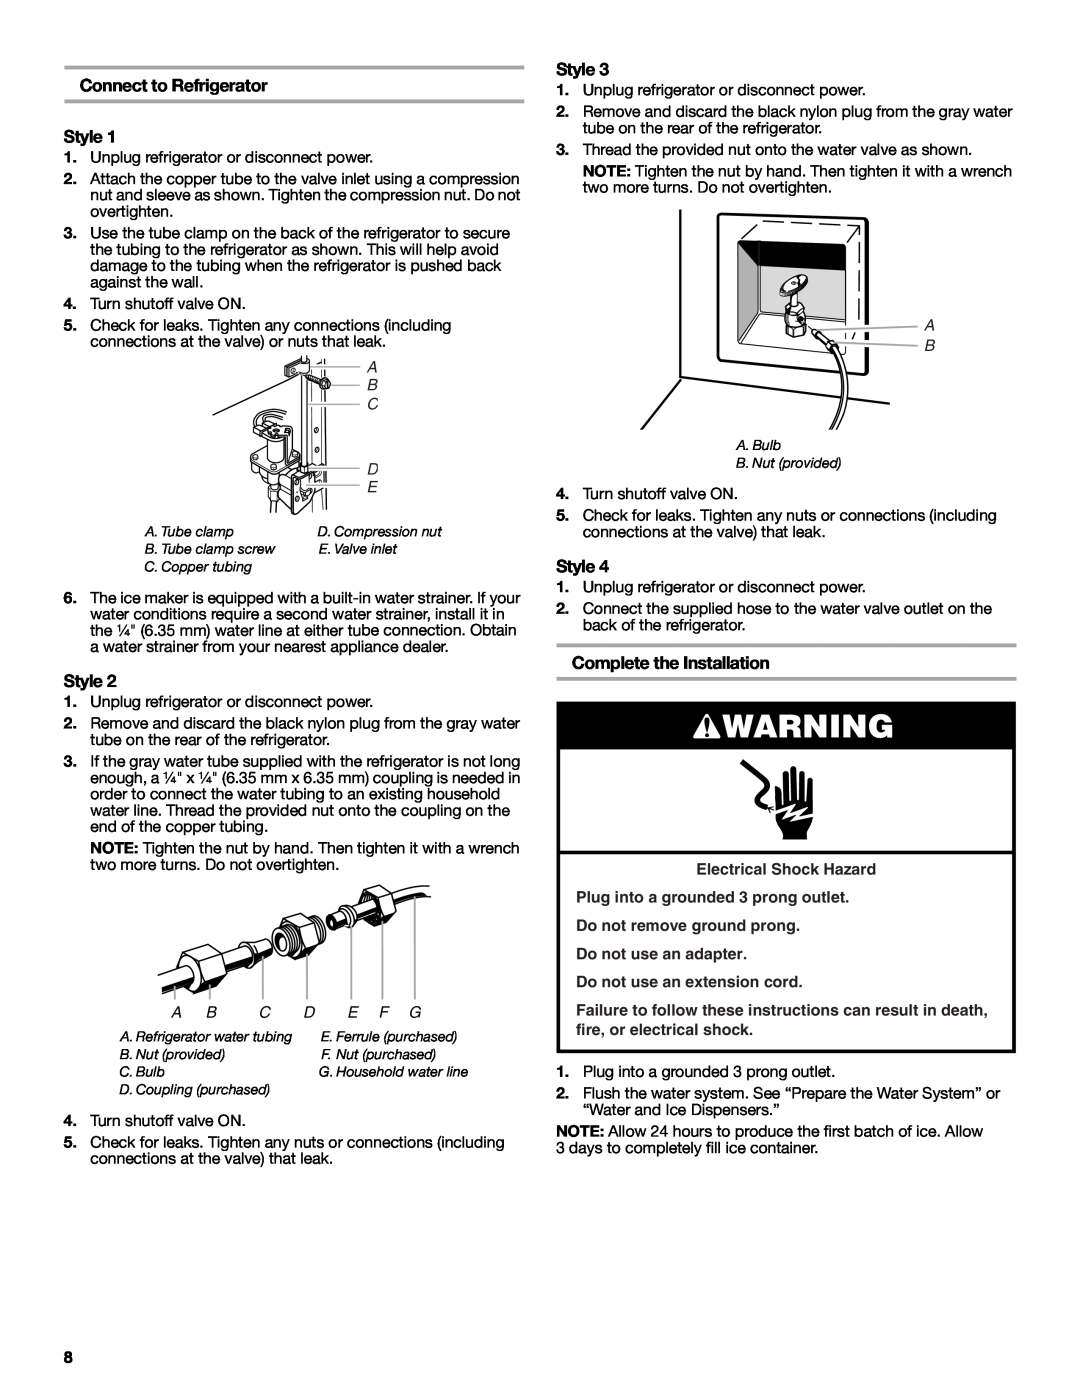 Whirlpool W10266784A manual Connect to Refrigerator Style, Complete the Installation, E F G, Do not use an extension cord 